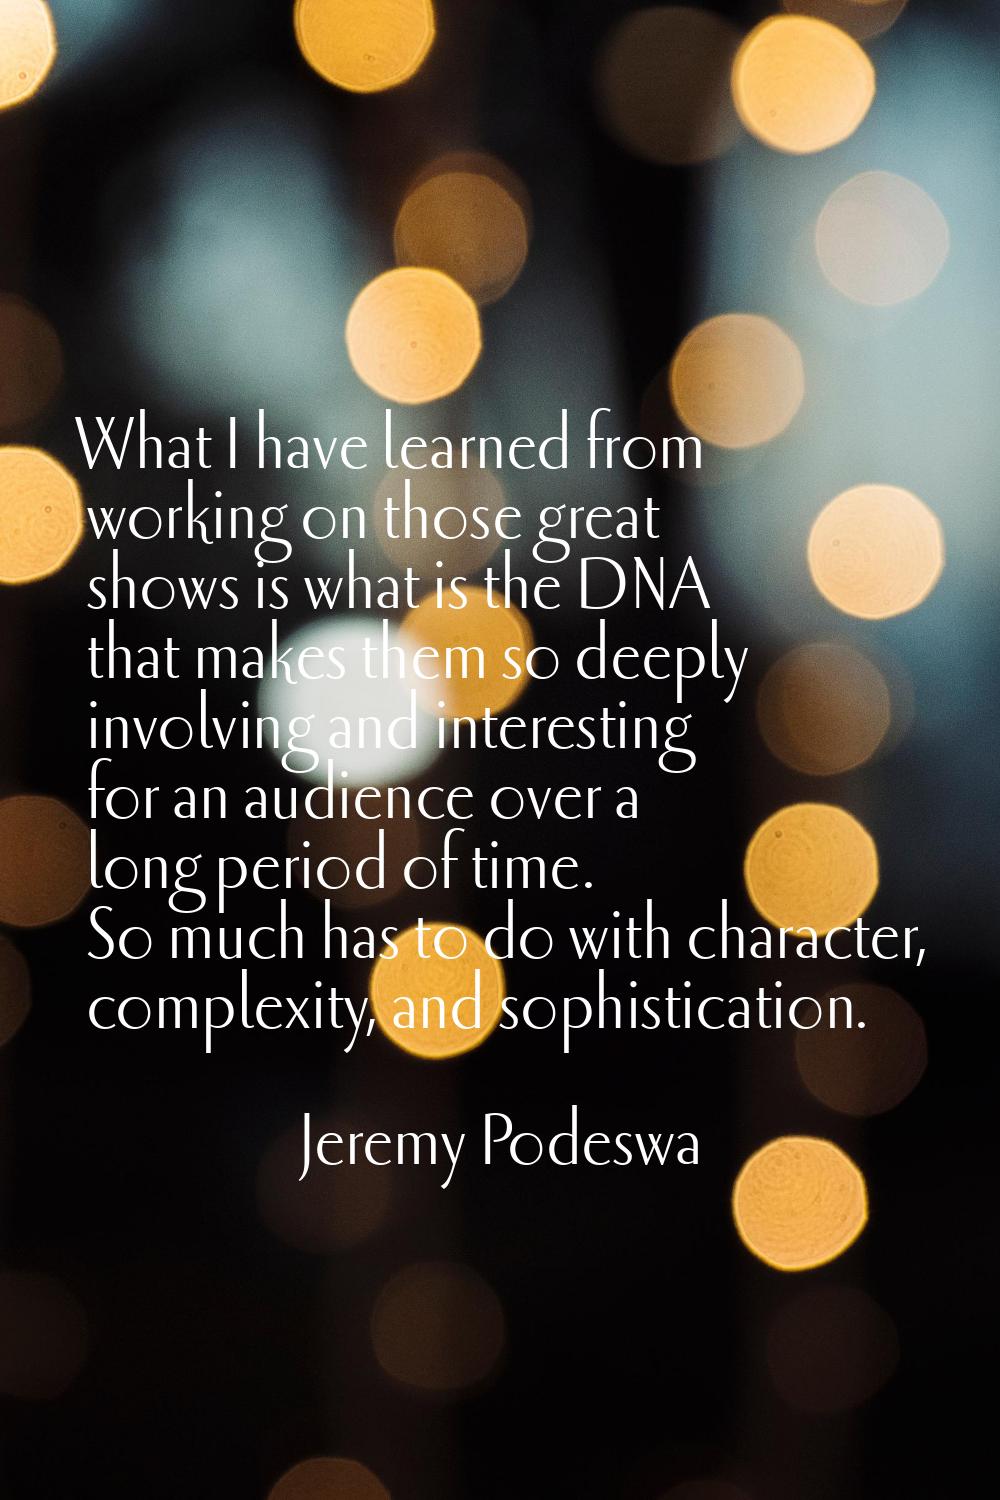 What I have learned from working on those great shows is what is the DNA that makes them so deeply 